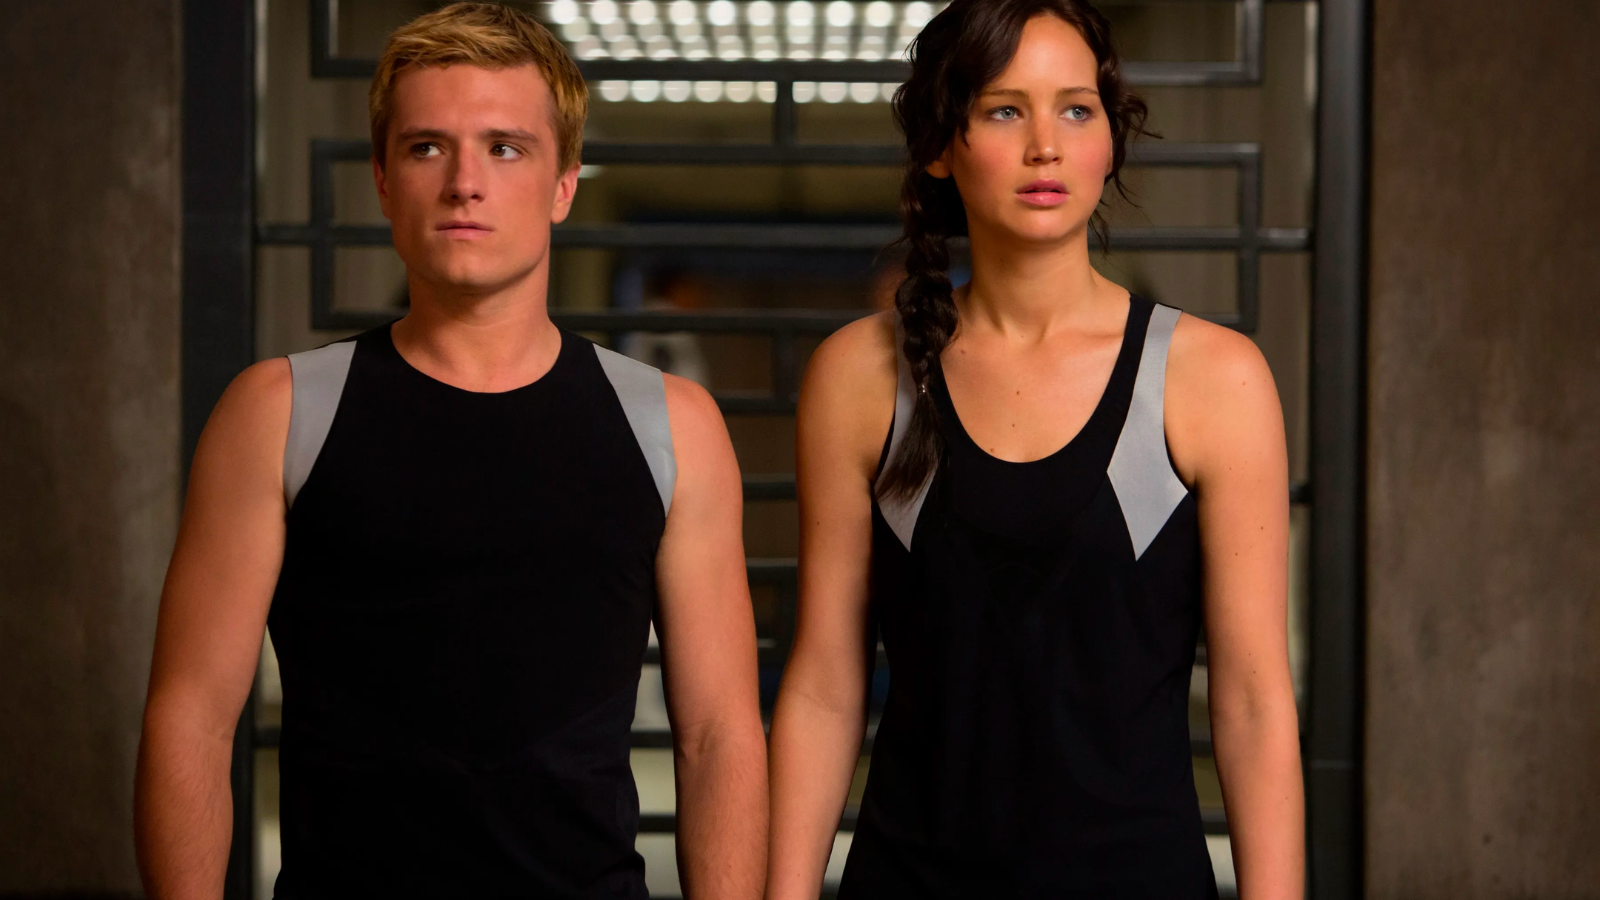 Peeta and Katniss standing side by side in The Hunger Games